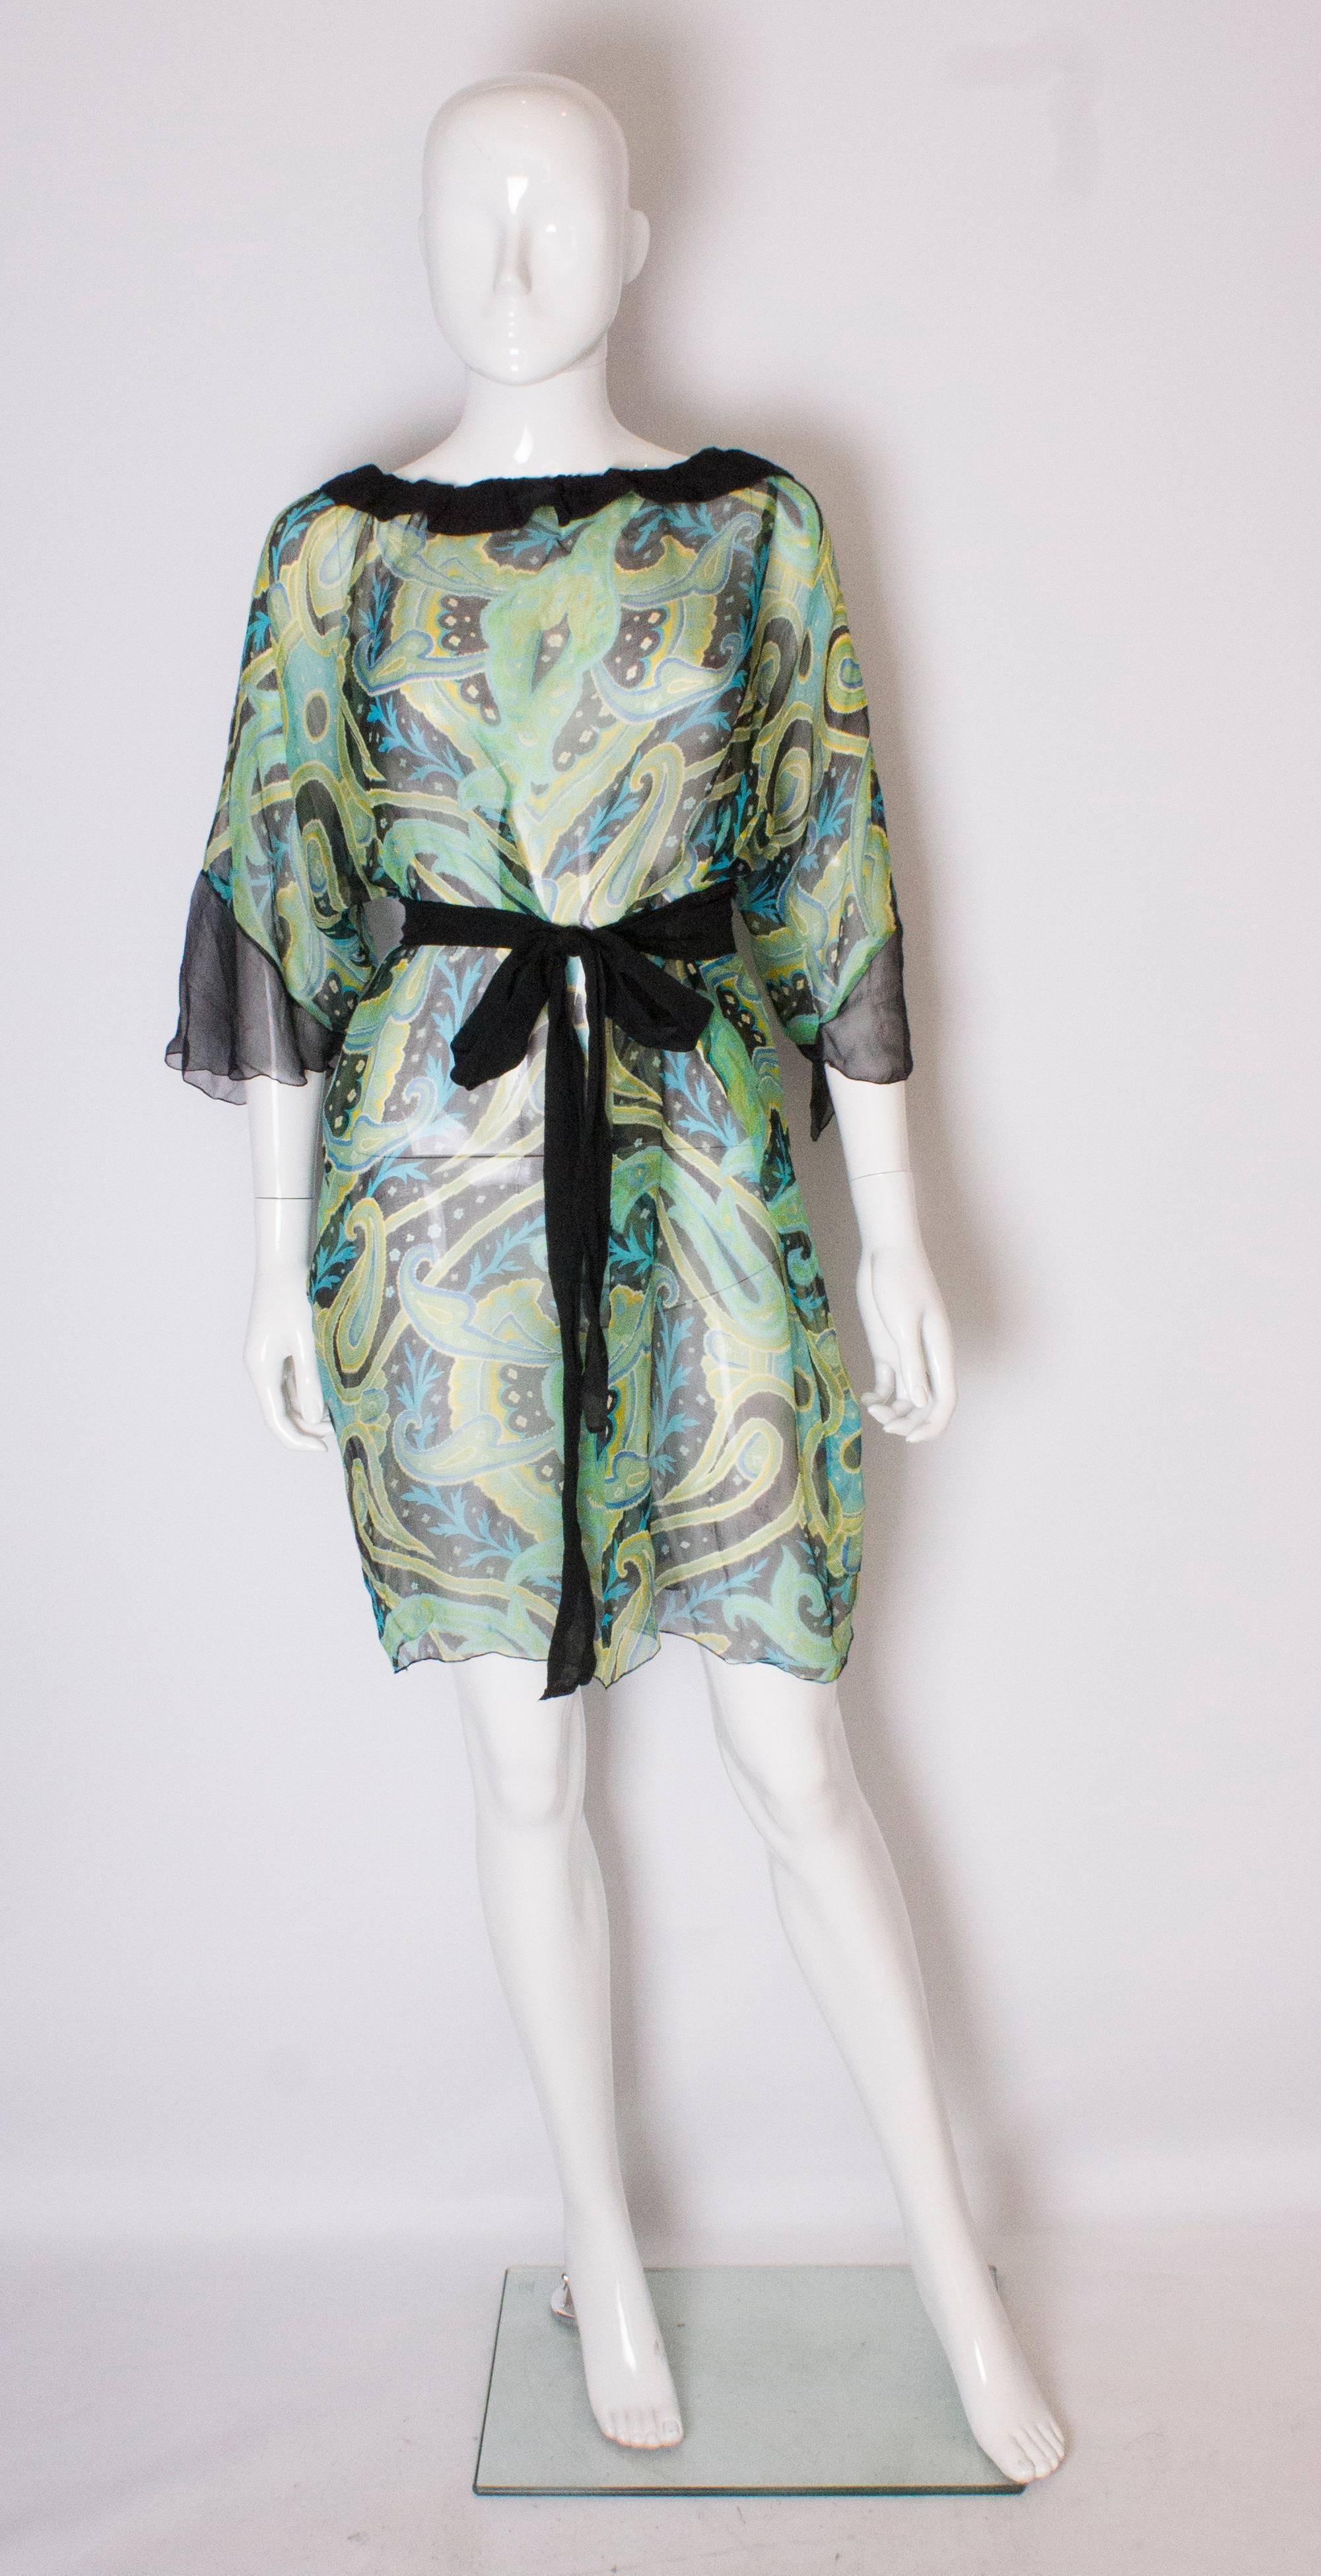 A lovely silk dress for summer in a mixture of green, black, blues and yellows. The dress has black silk collar, cuffs and a self tie belt.